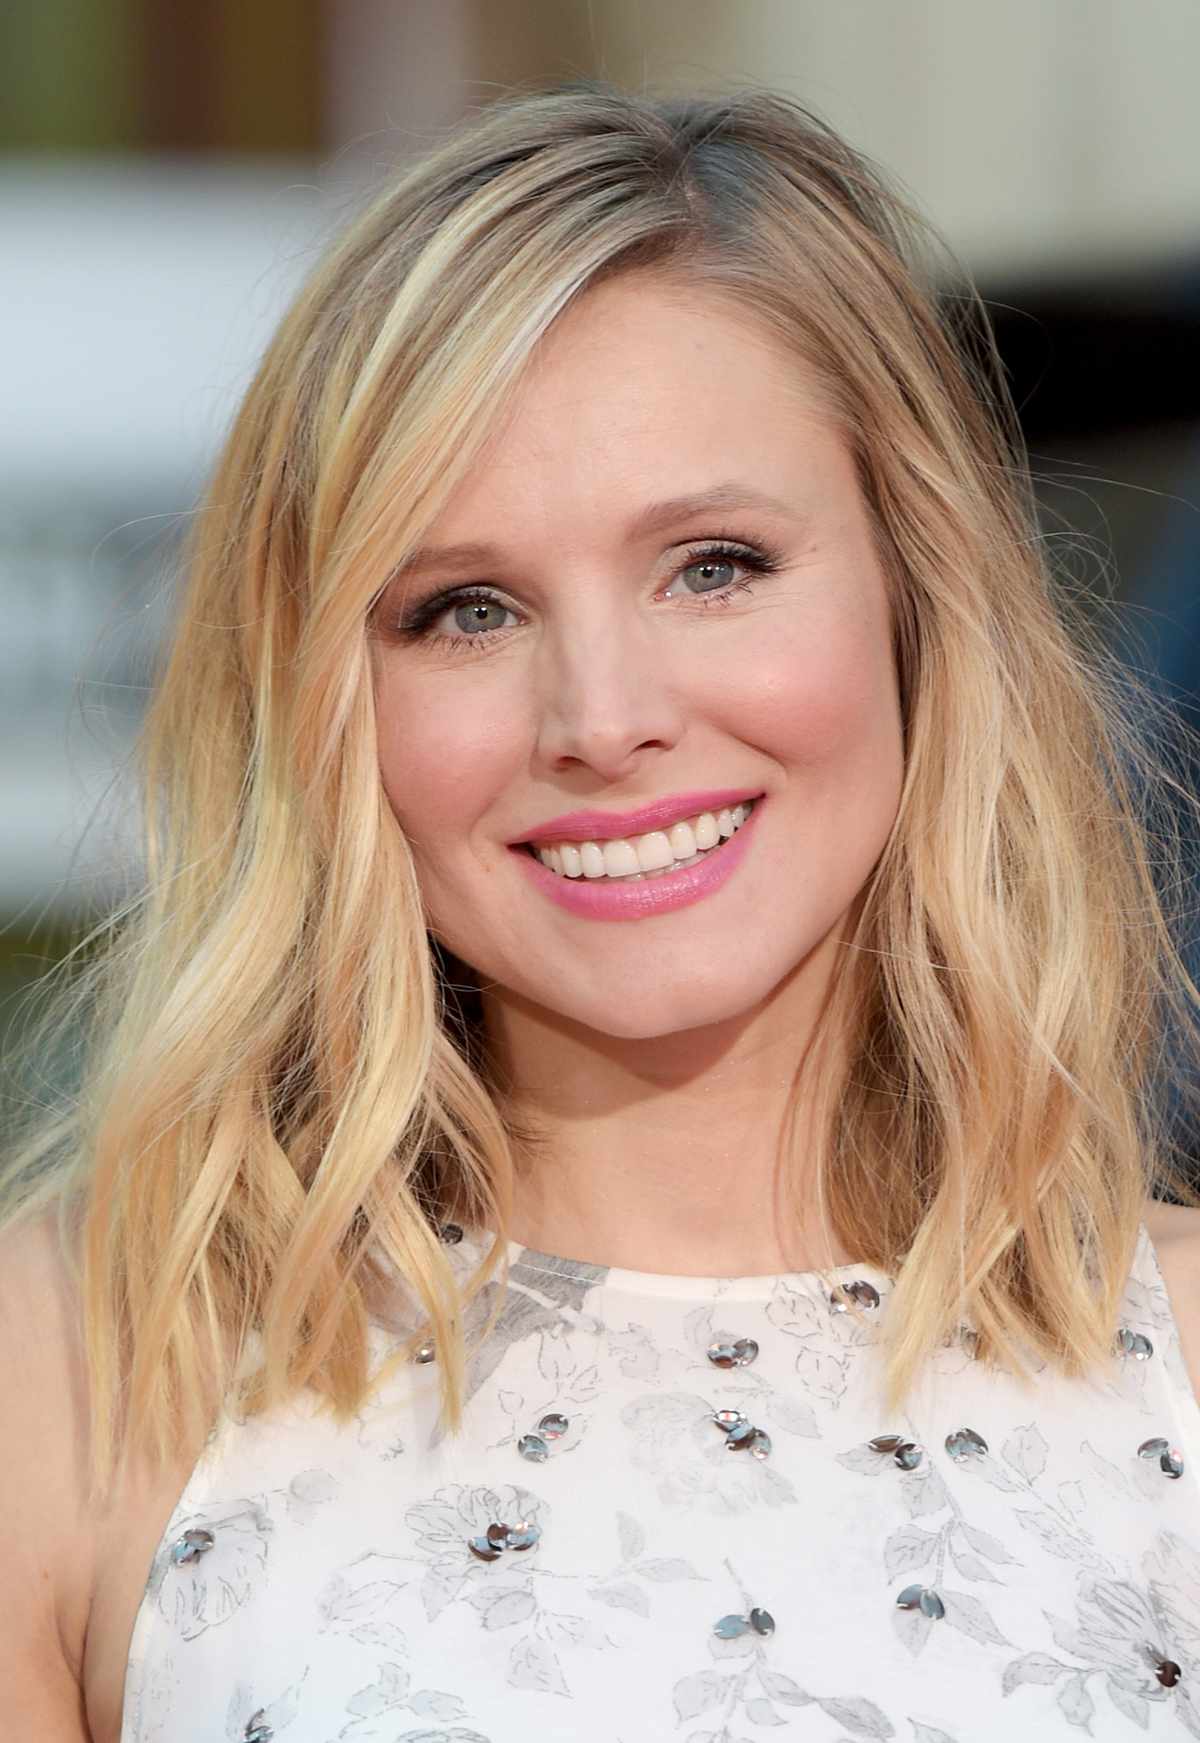 ctress Kristen Bell arrives at the premiere of Warner Bros. Pictures' "This Is Where I Leave You" at TCL Chinese Theatre on September 15, 2014 in Hollywood, California.